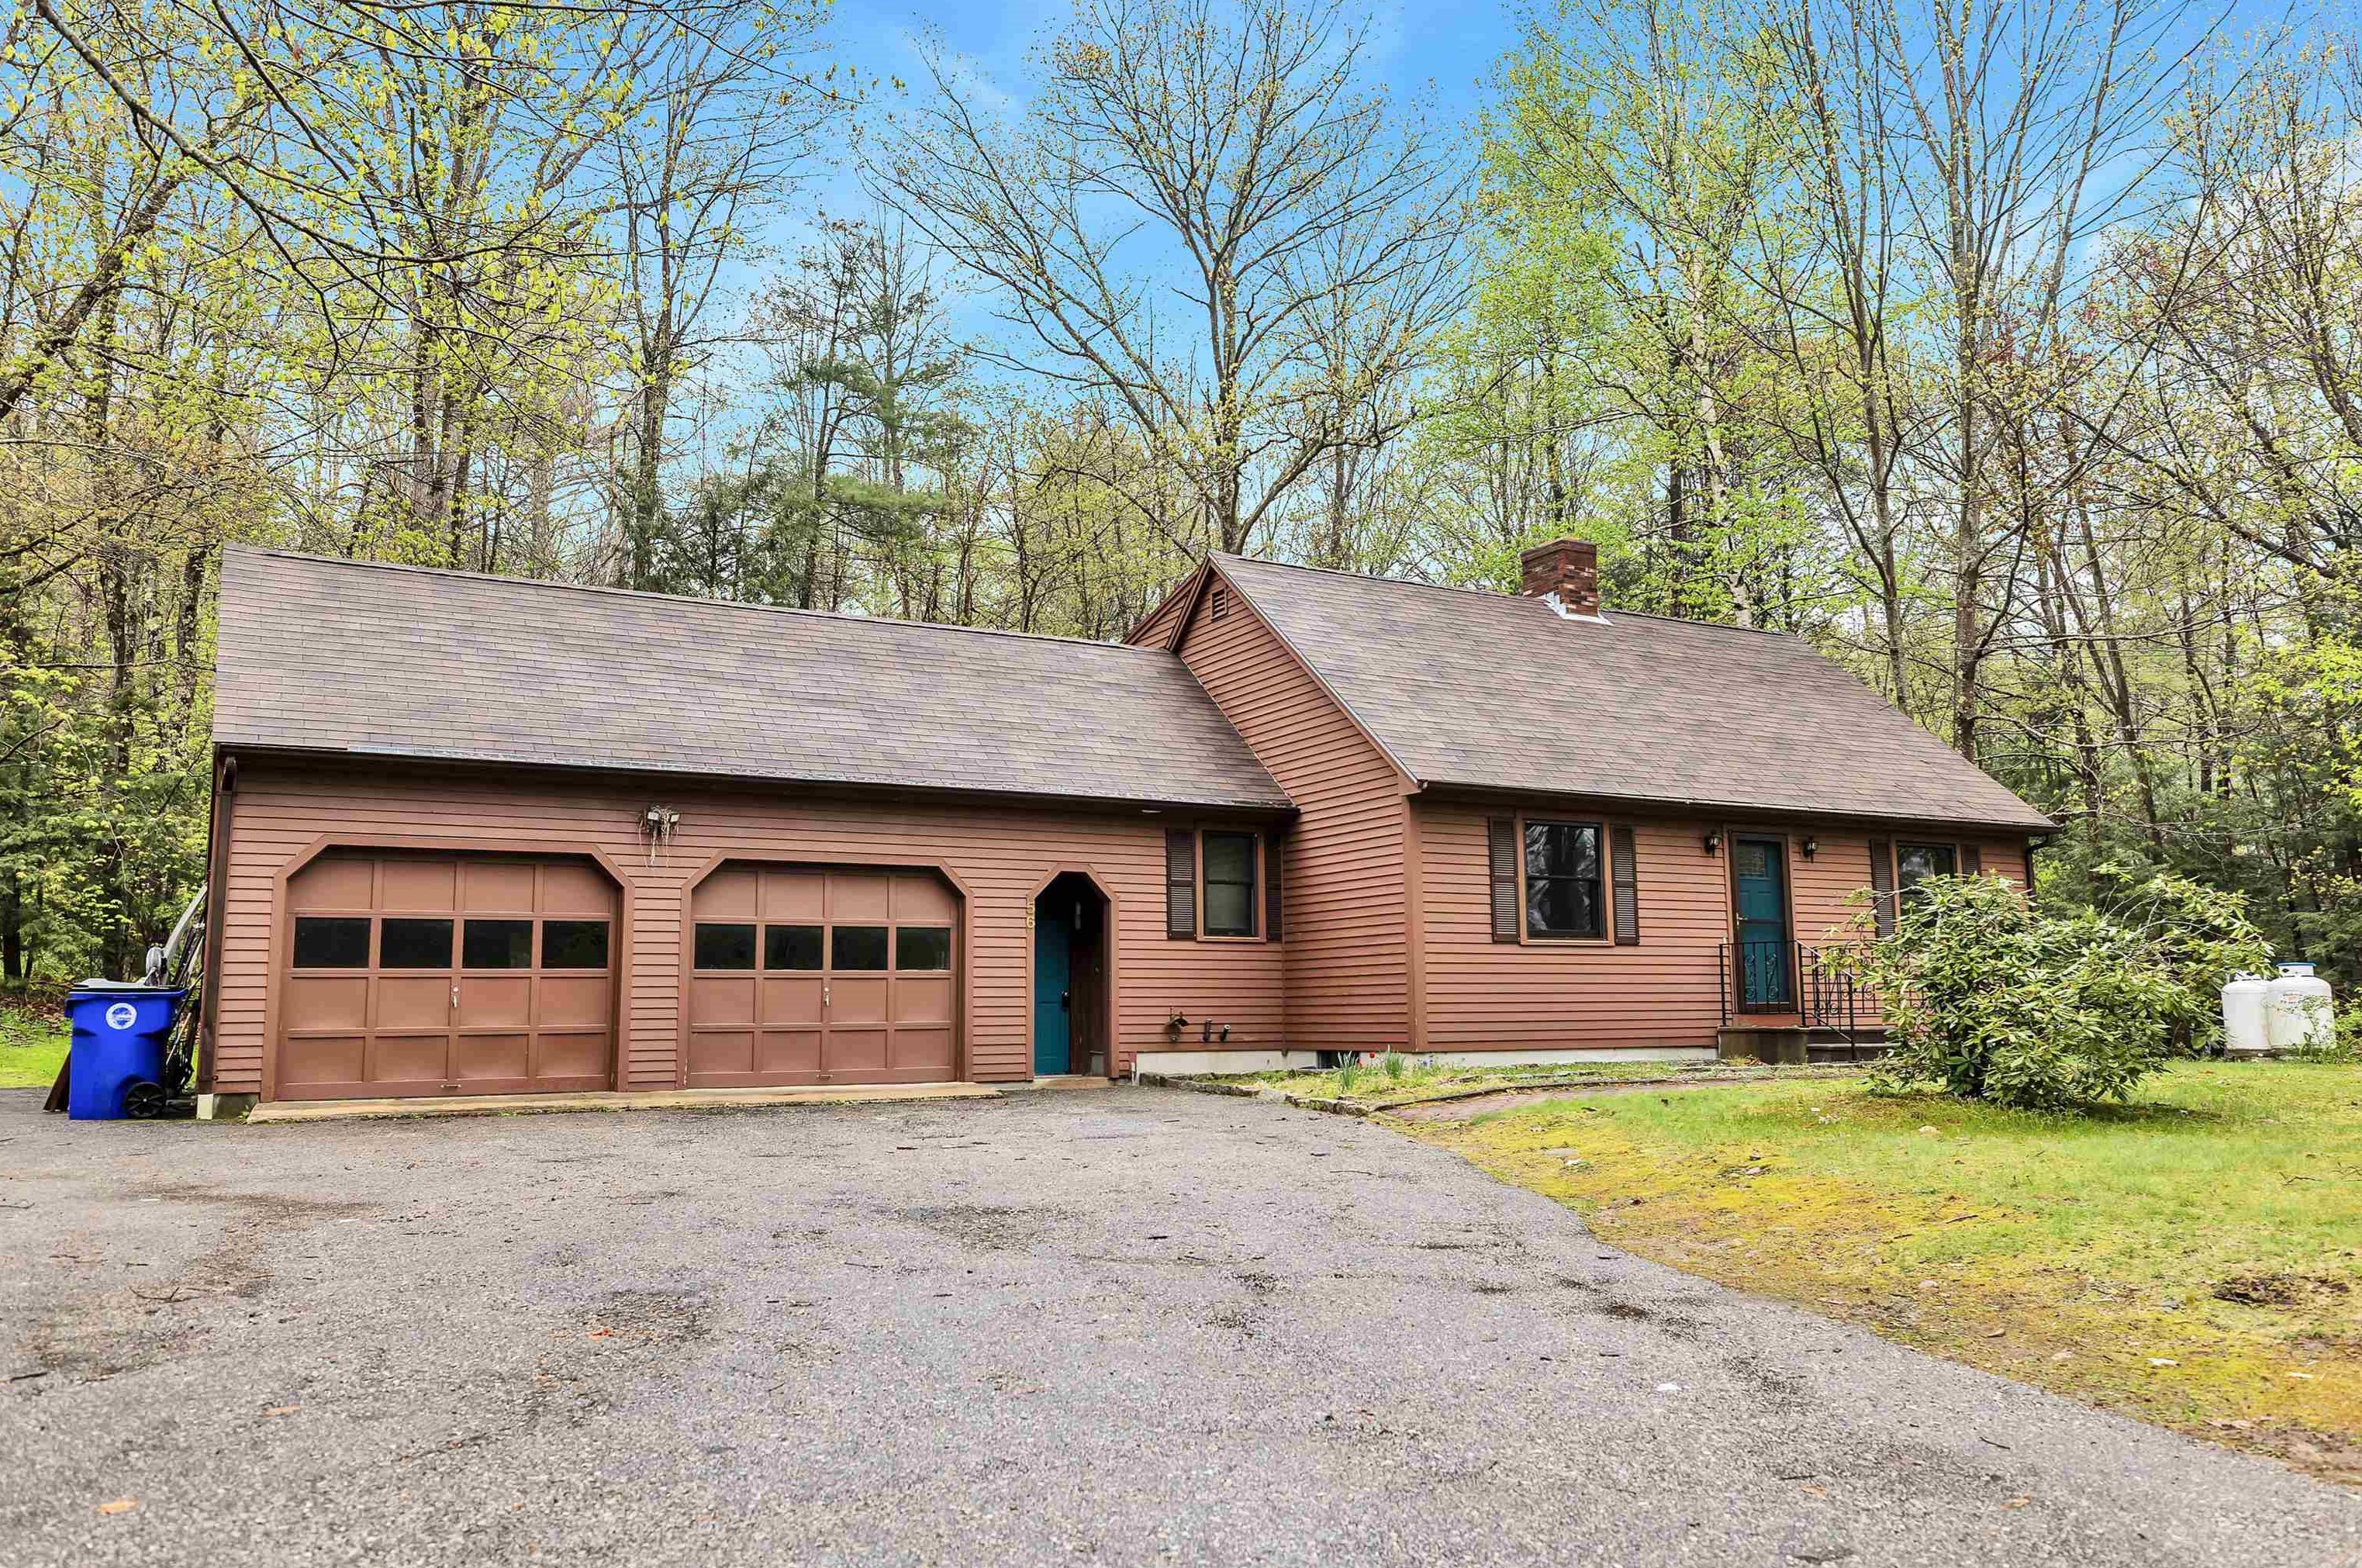 56 Wallace Rd, Goffstown, NH